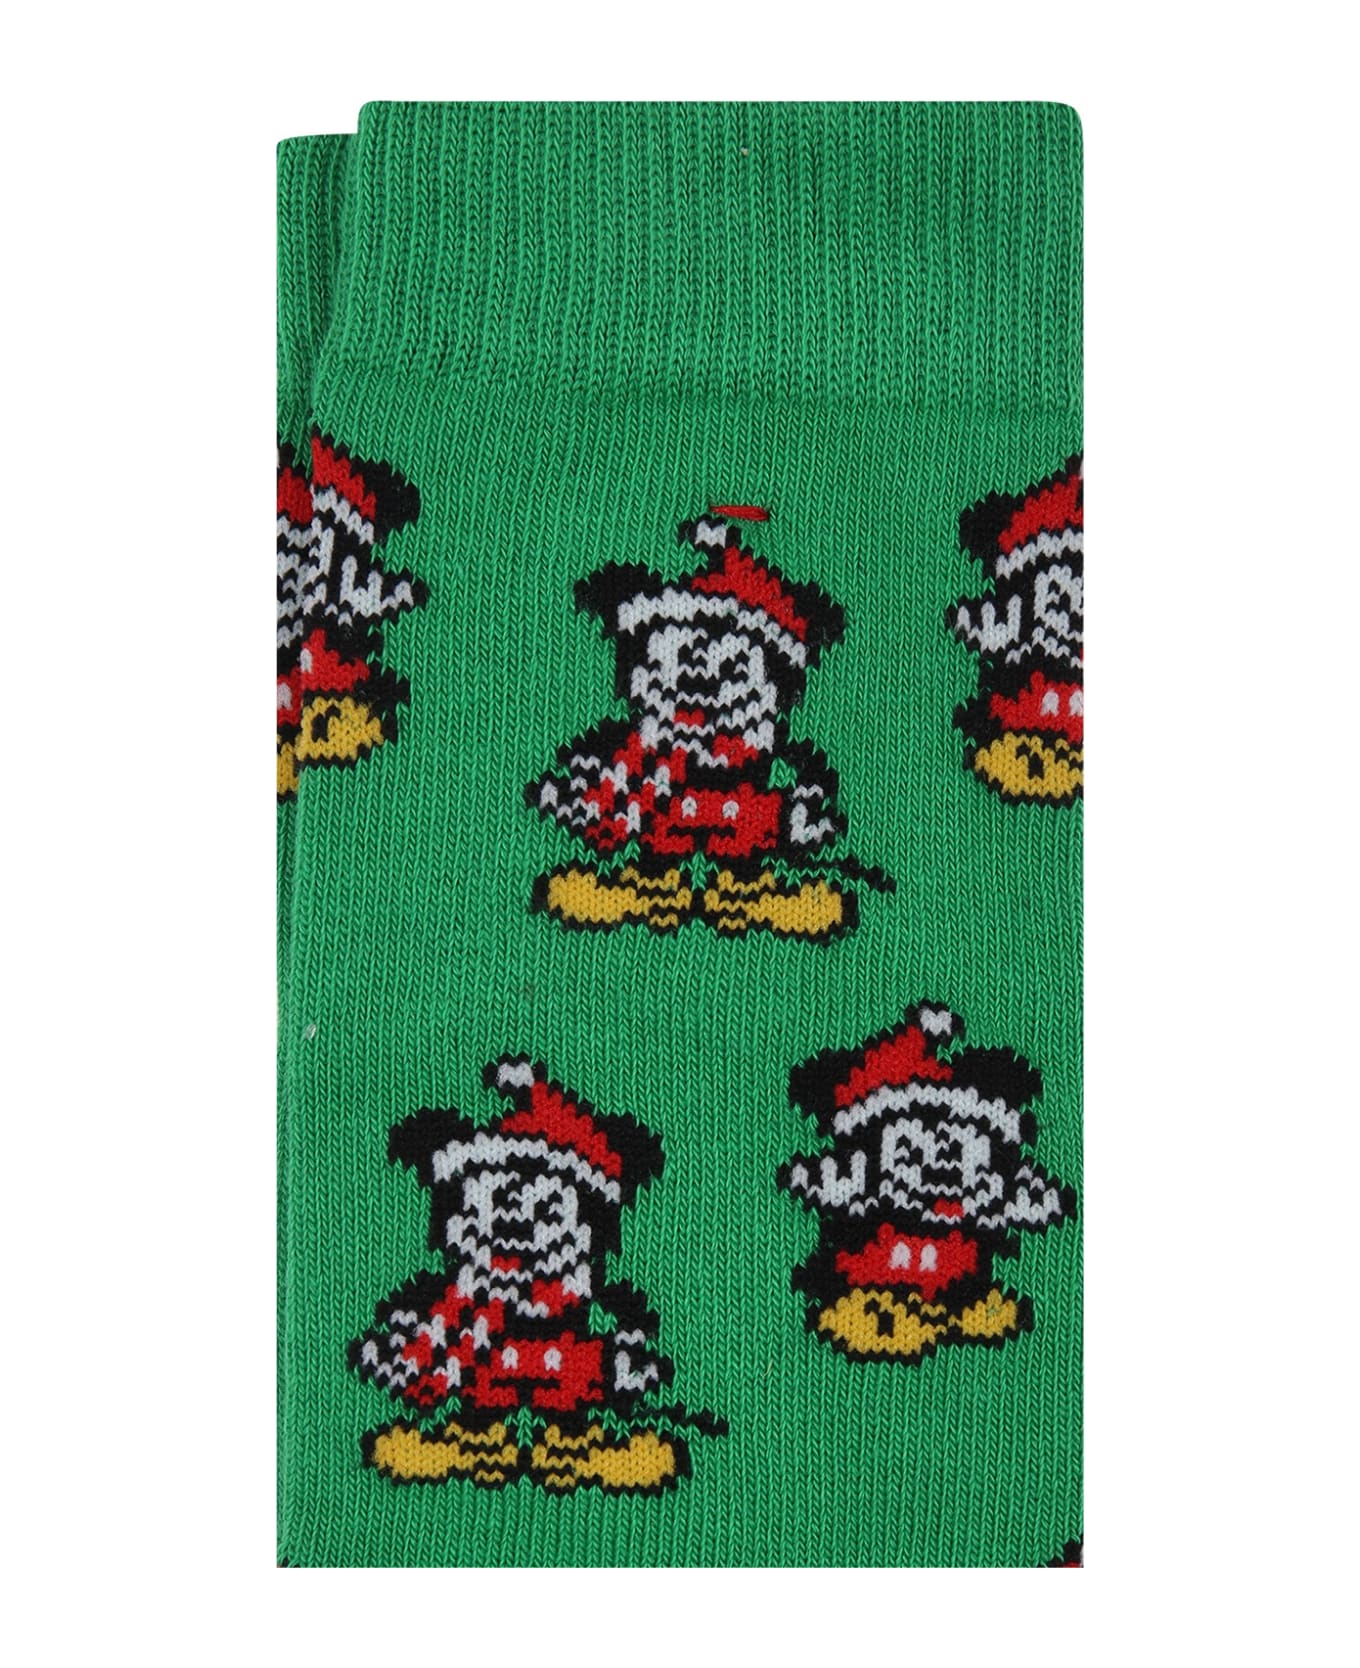 MC2 Saint Barth Green Socks For Boy With Micky Mouse - Green シューズ